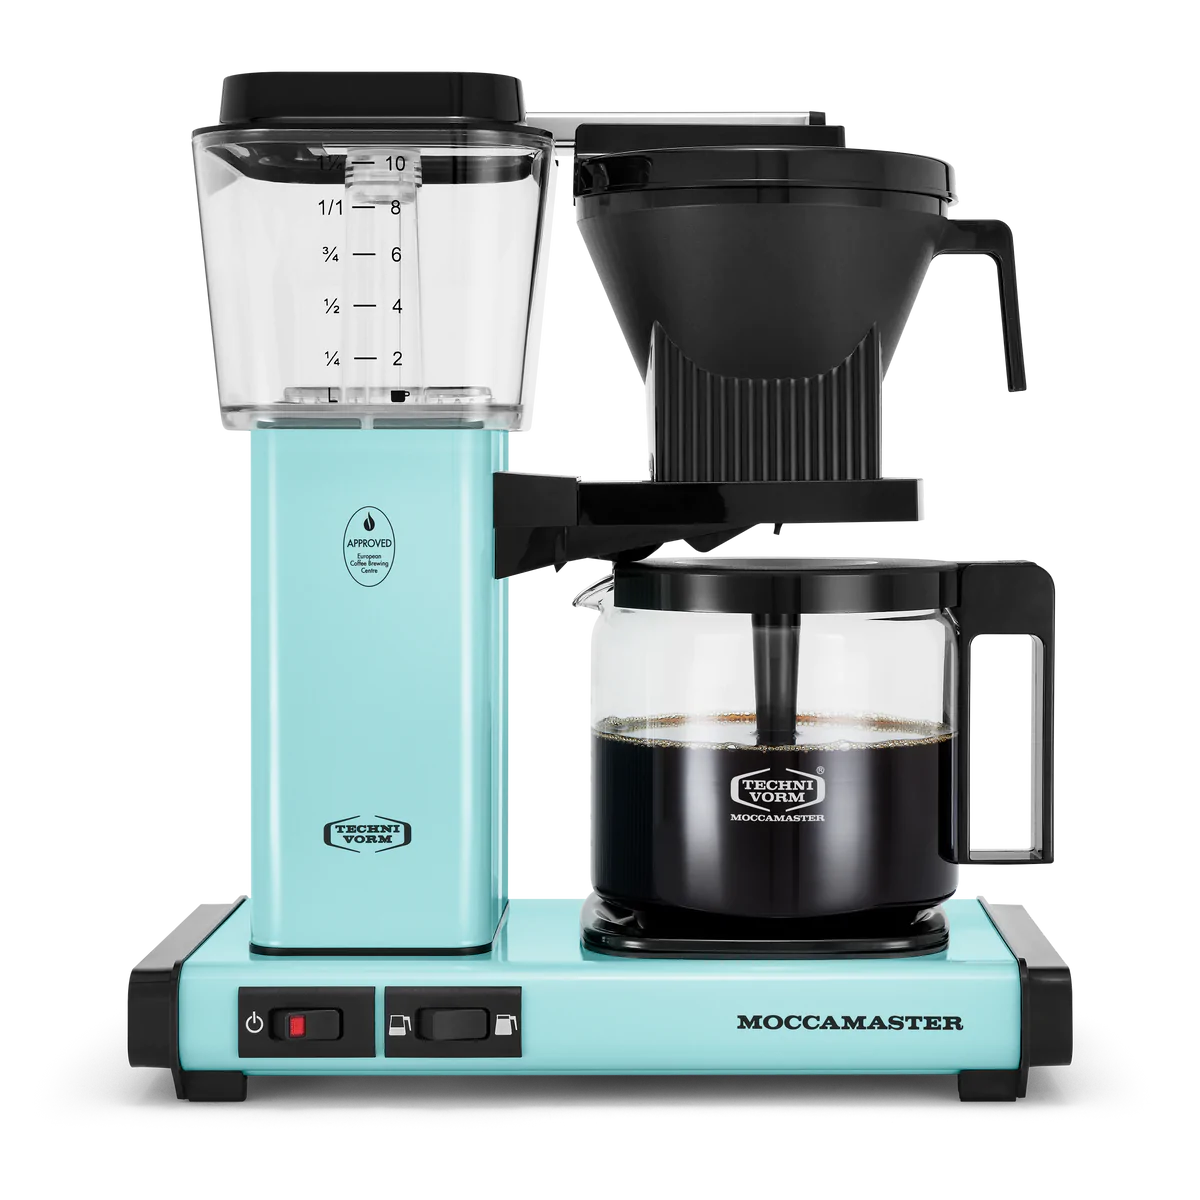 Moccamaster KBGV coffee brewer in Turquoise